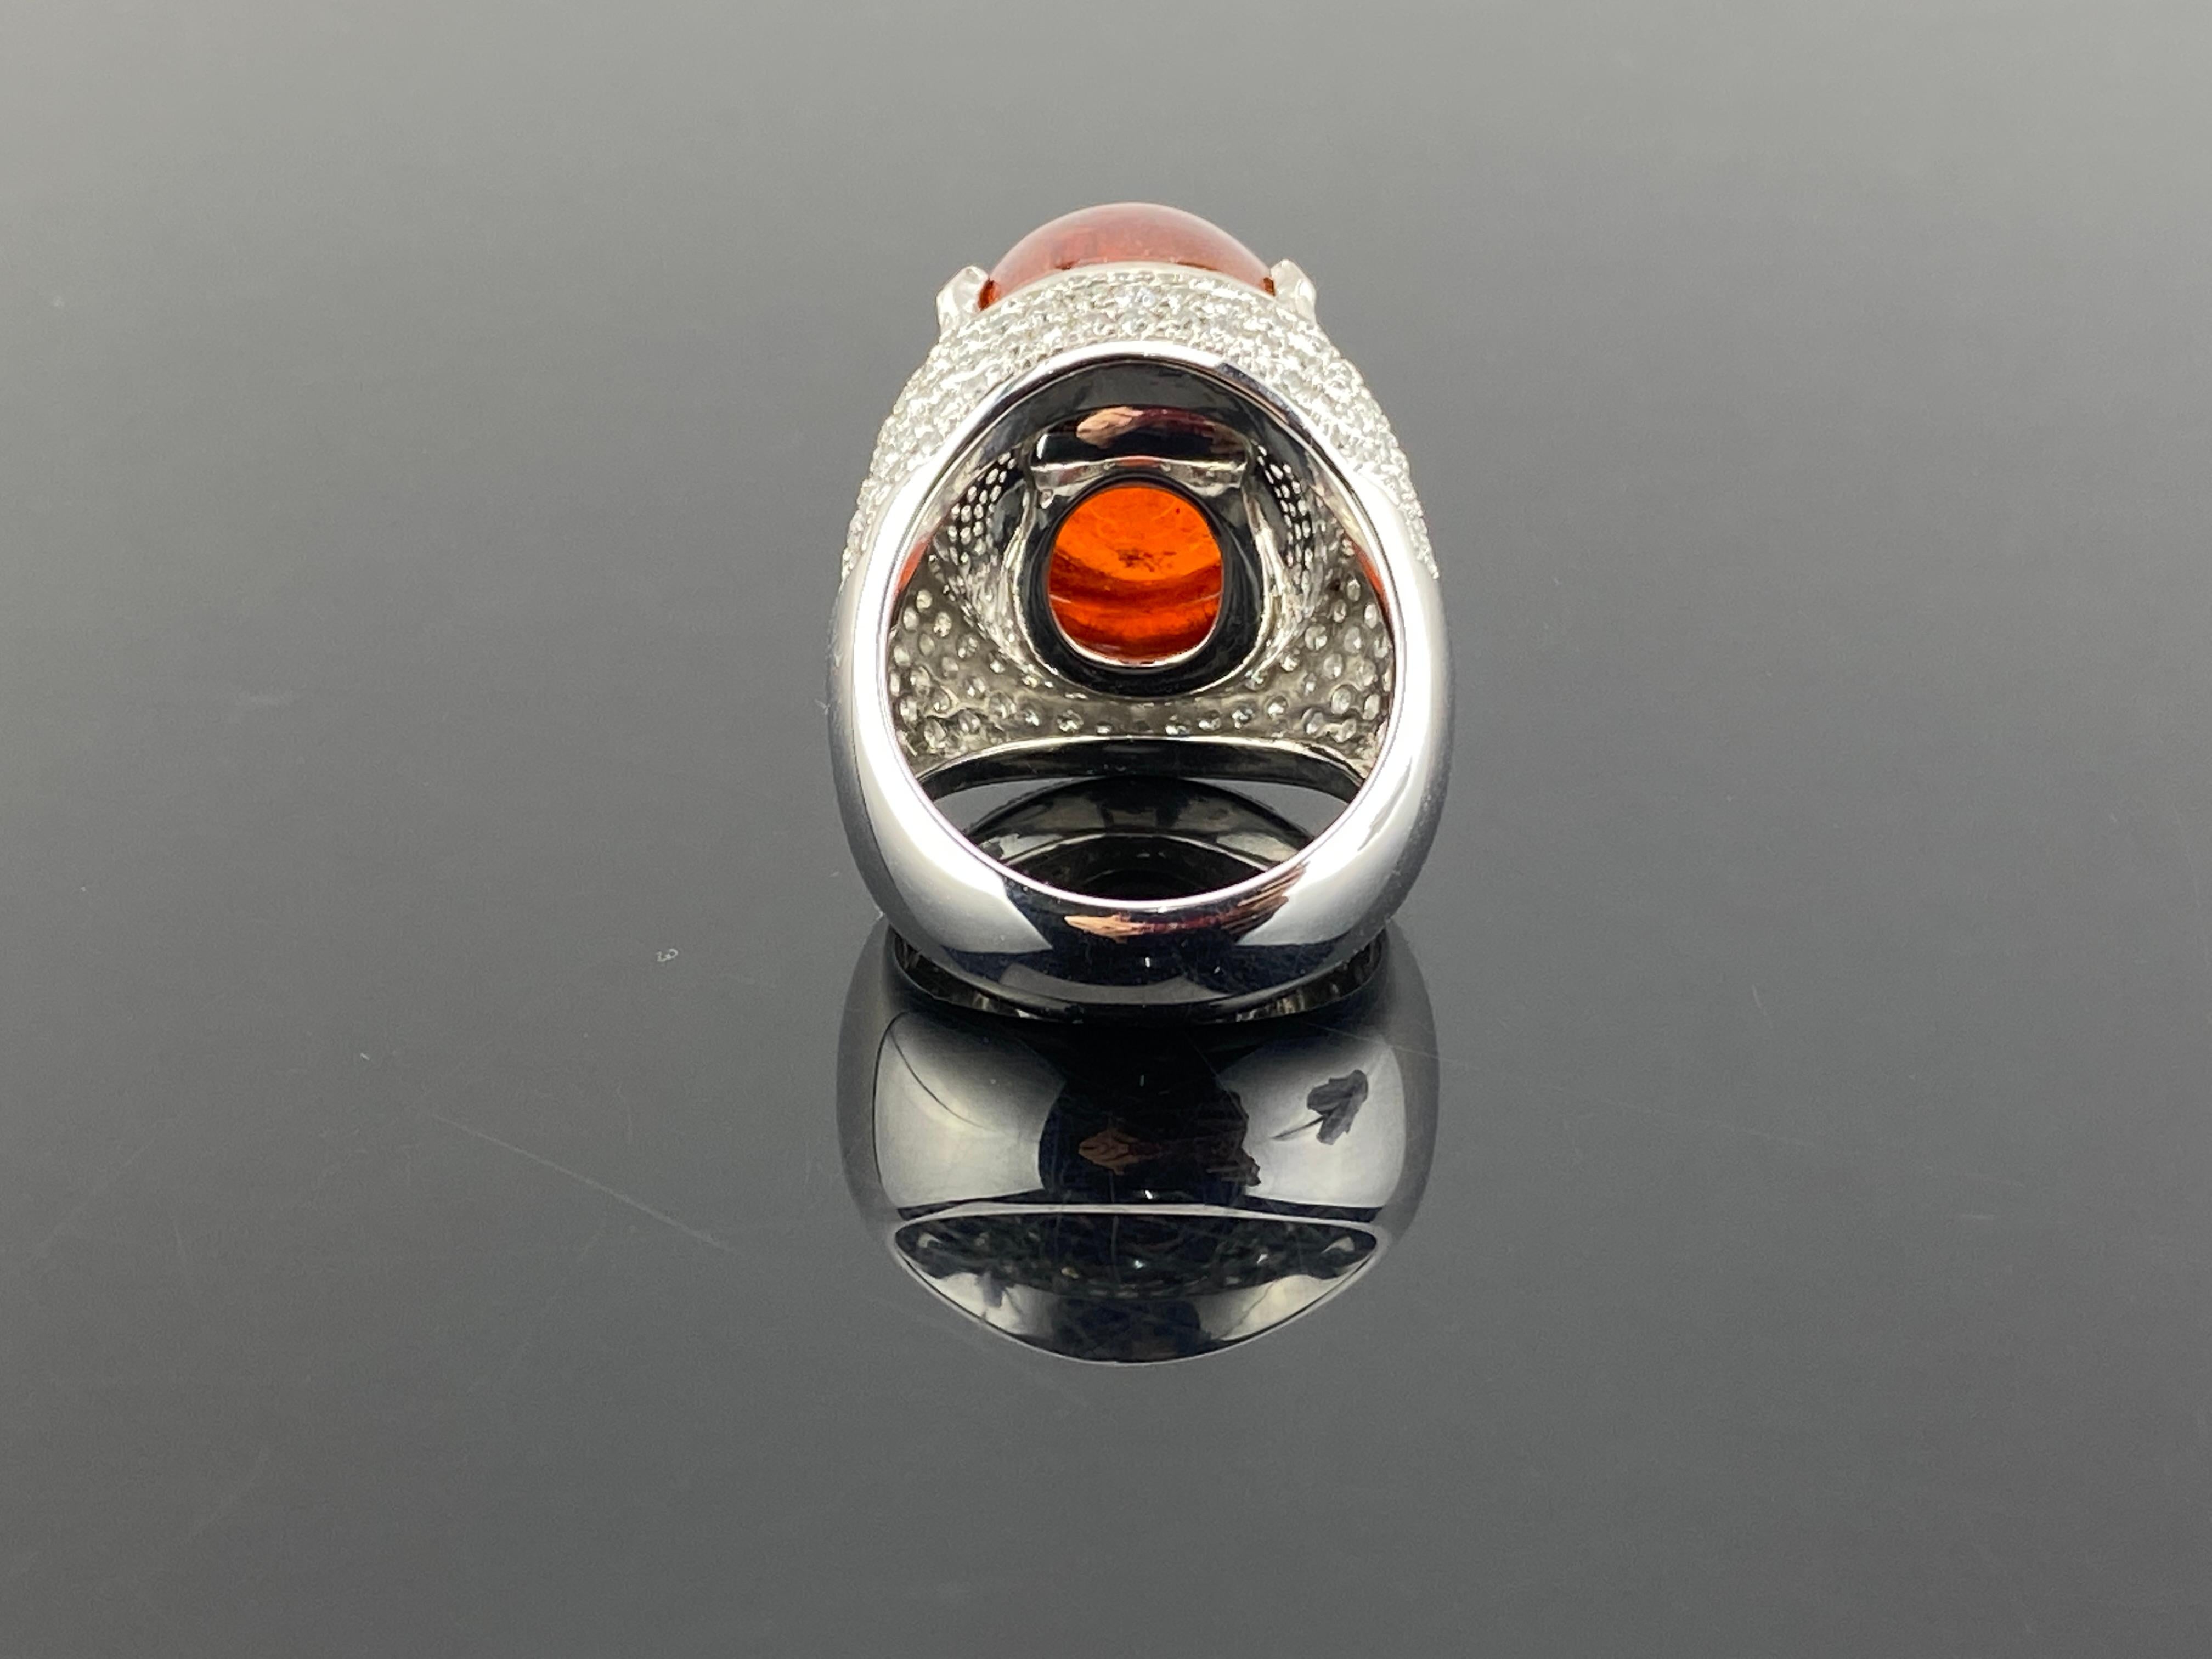 Mandarin Garnet Spessatite Cabochon Cocktail Ring With Diamonds And 18K Gold  In New Condition For Sale In Bangkok, Thailand